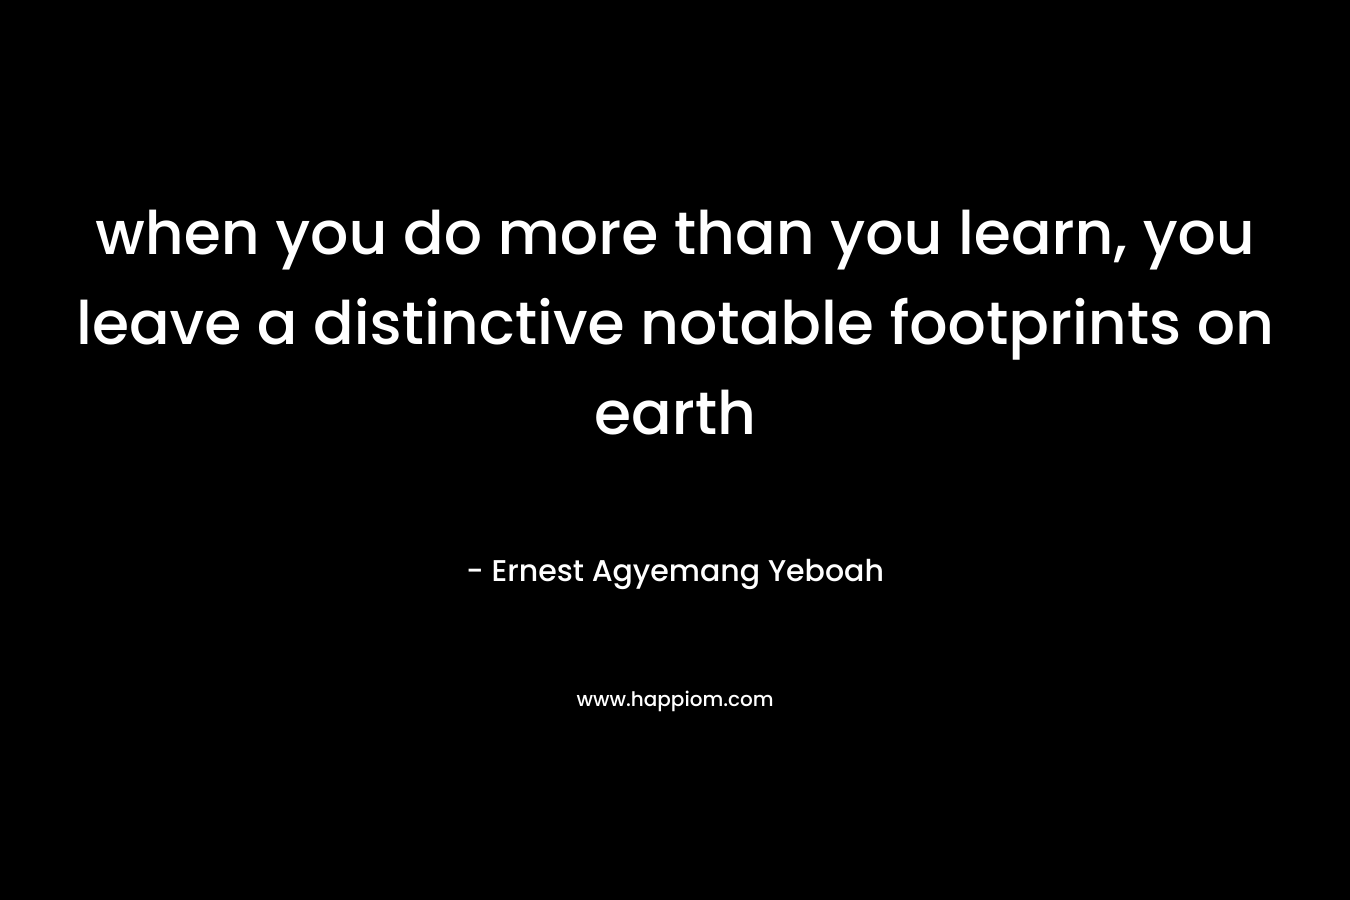 when you do more than you learn, you leave a distinctive notable footprints on earth